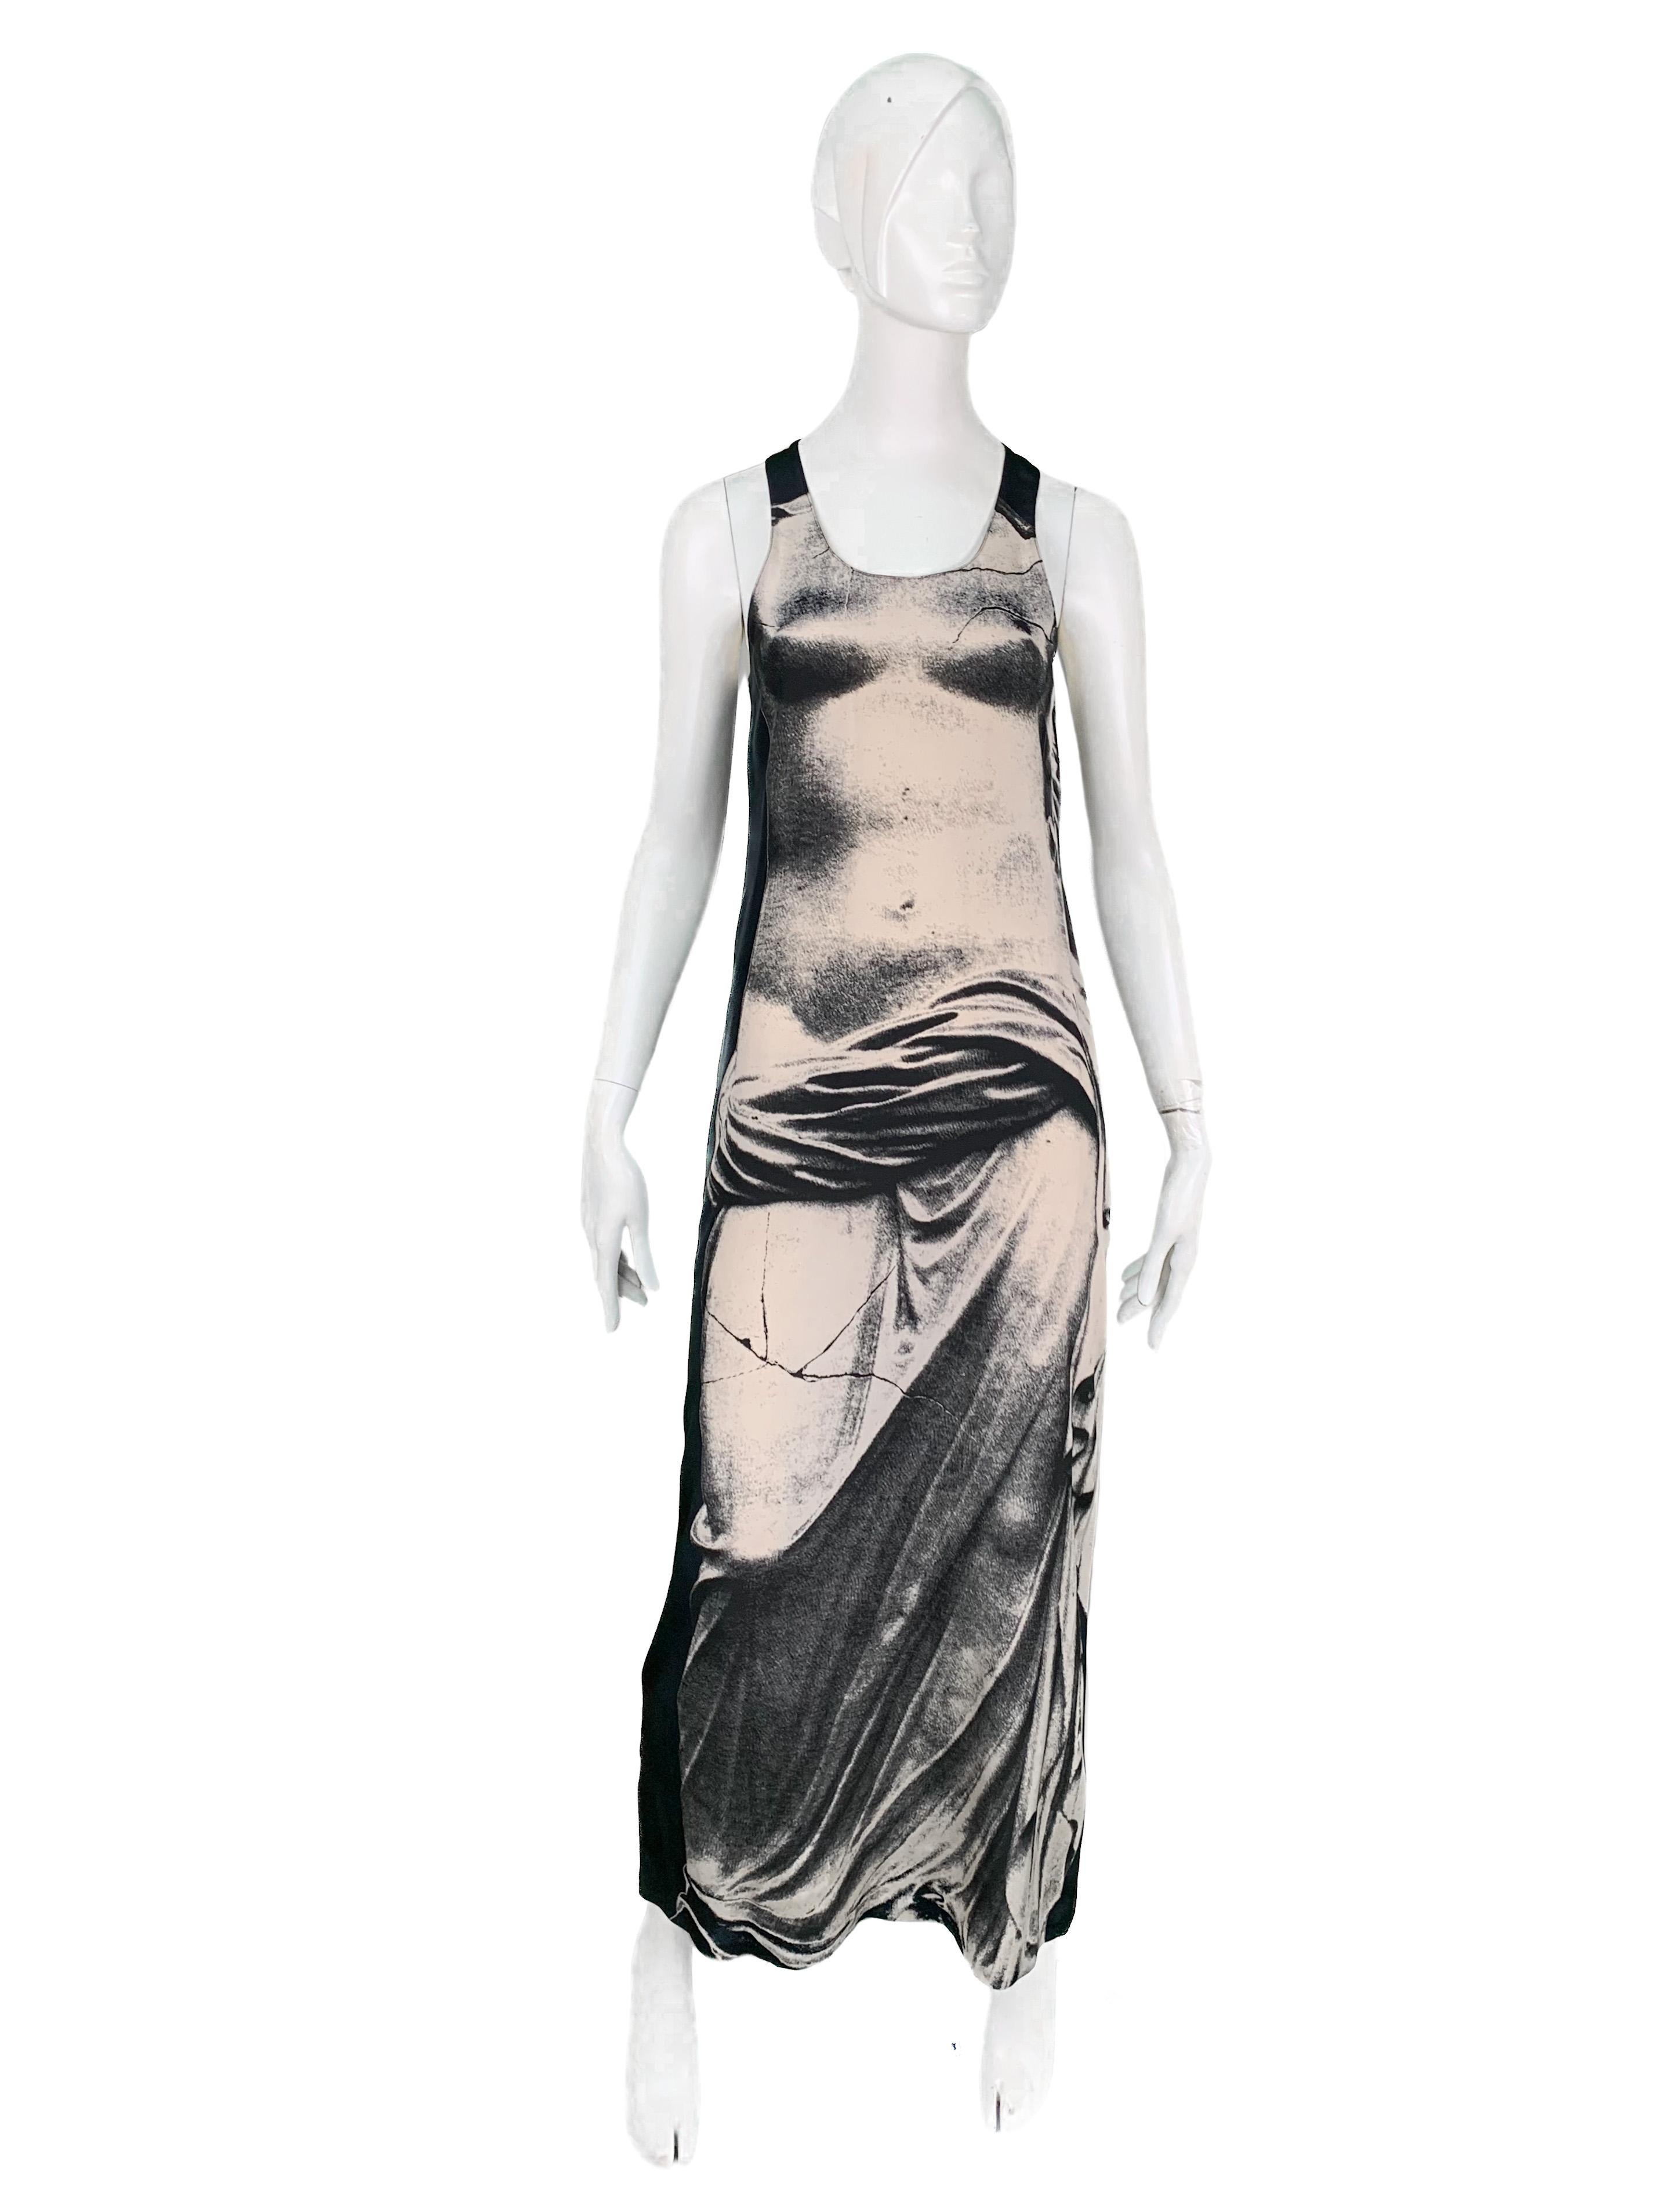 Arguably one of the most important dress designs of the 20th century, this Jean Paul Gaultier SS 1999 silk maxi dress is similar to the one featured in the Metropolitan Museum of Art collection. Its iconic design is a frequent influence for fashion